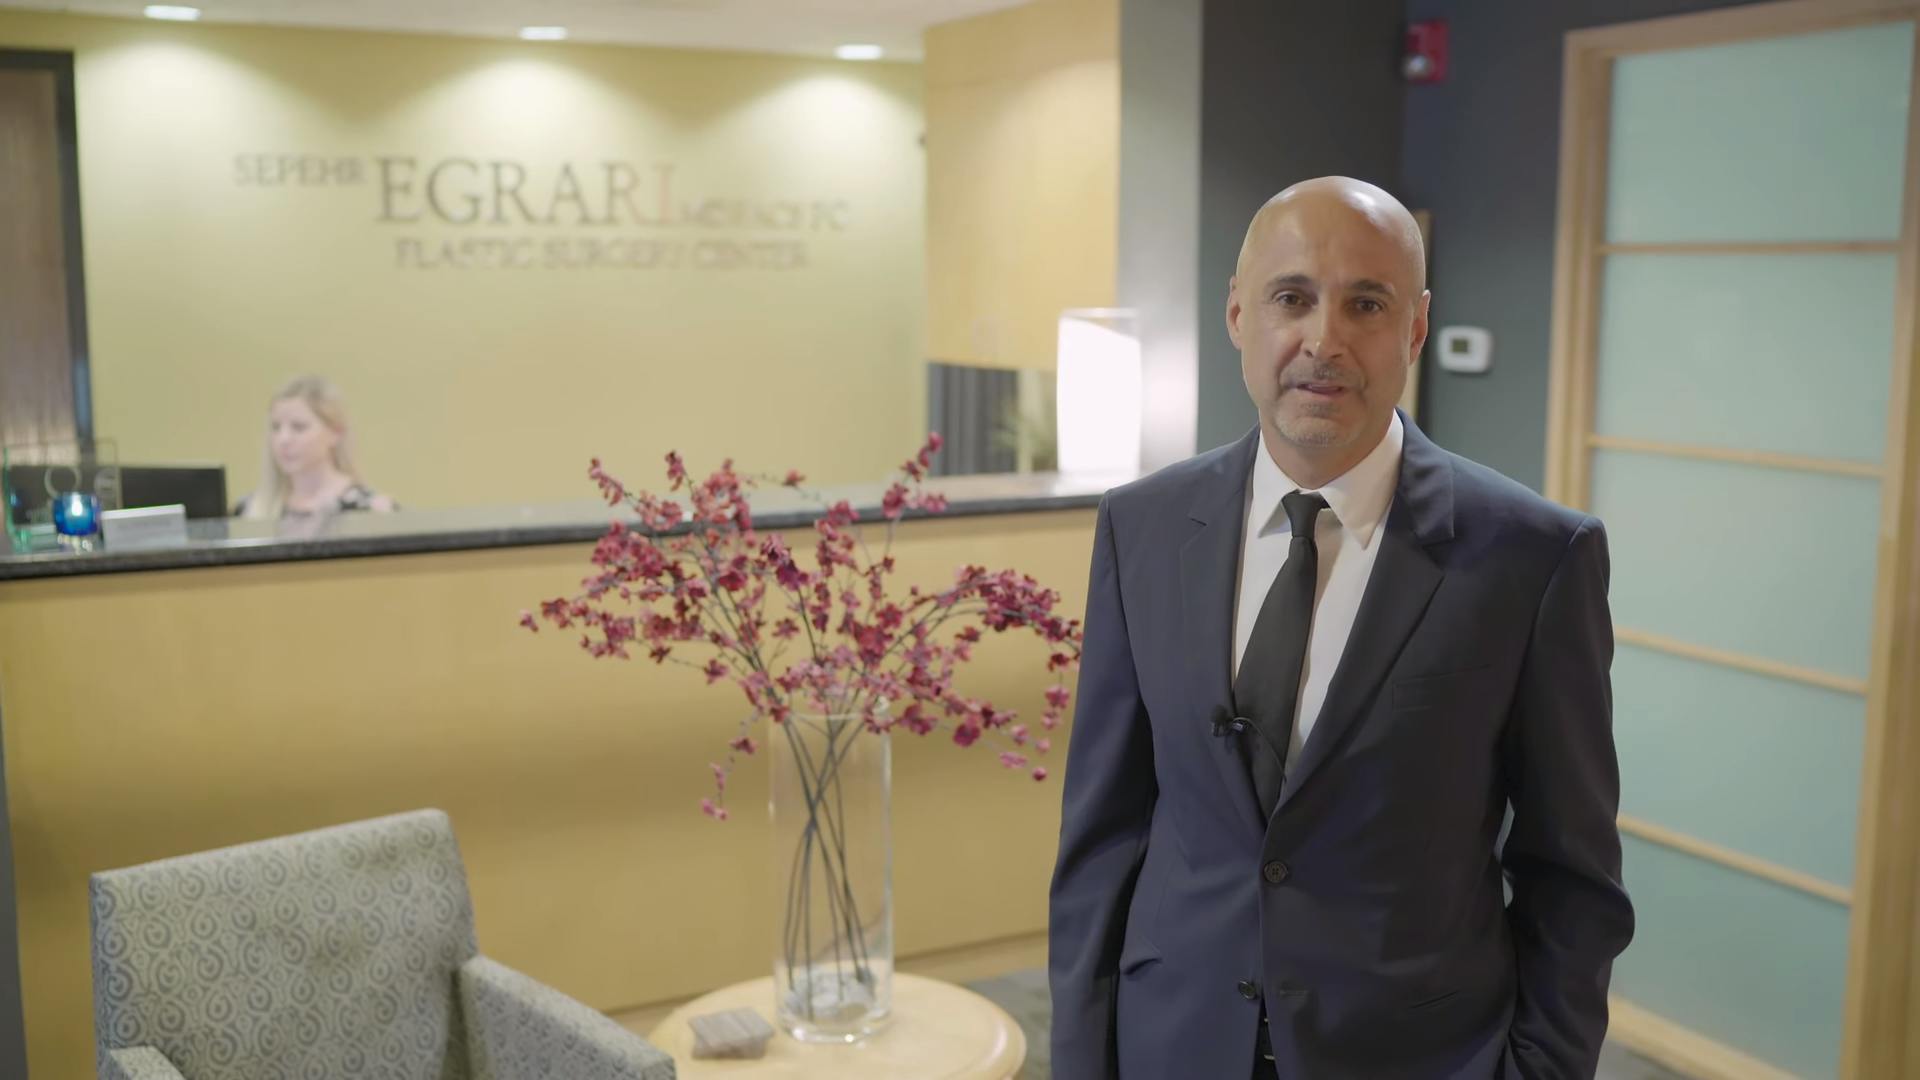 Dr. Egrari  in a suit standing in the lobby of his practice